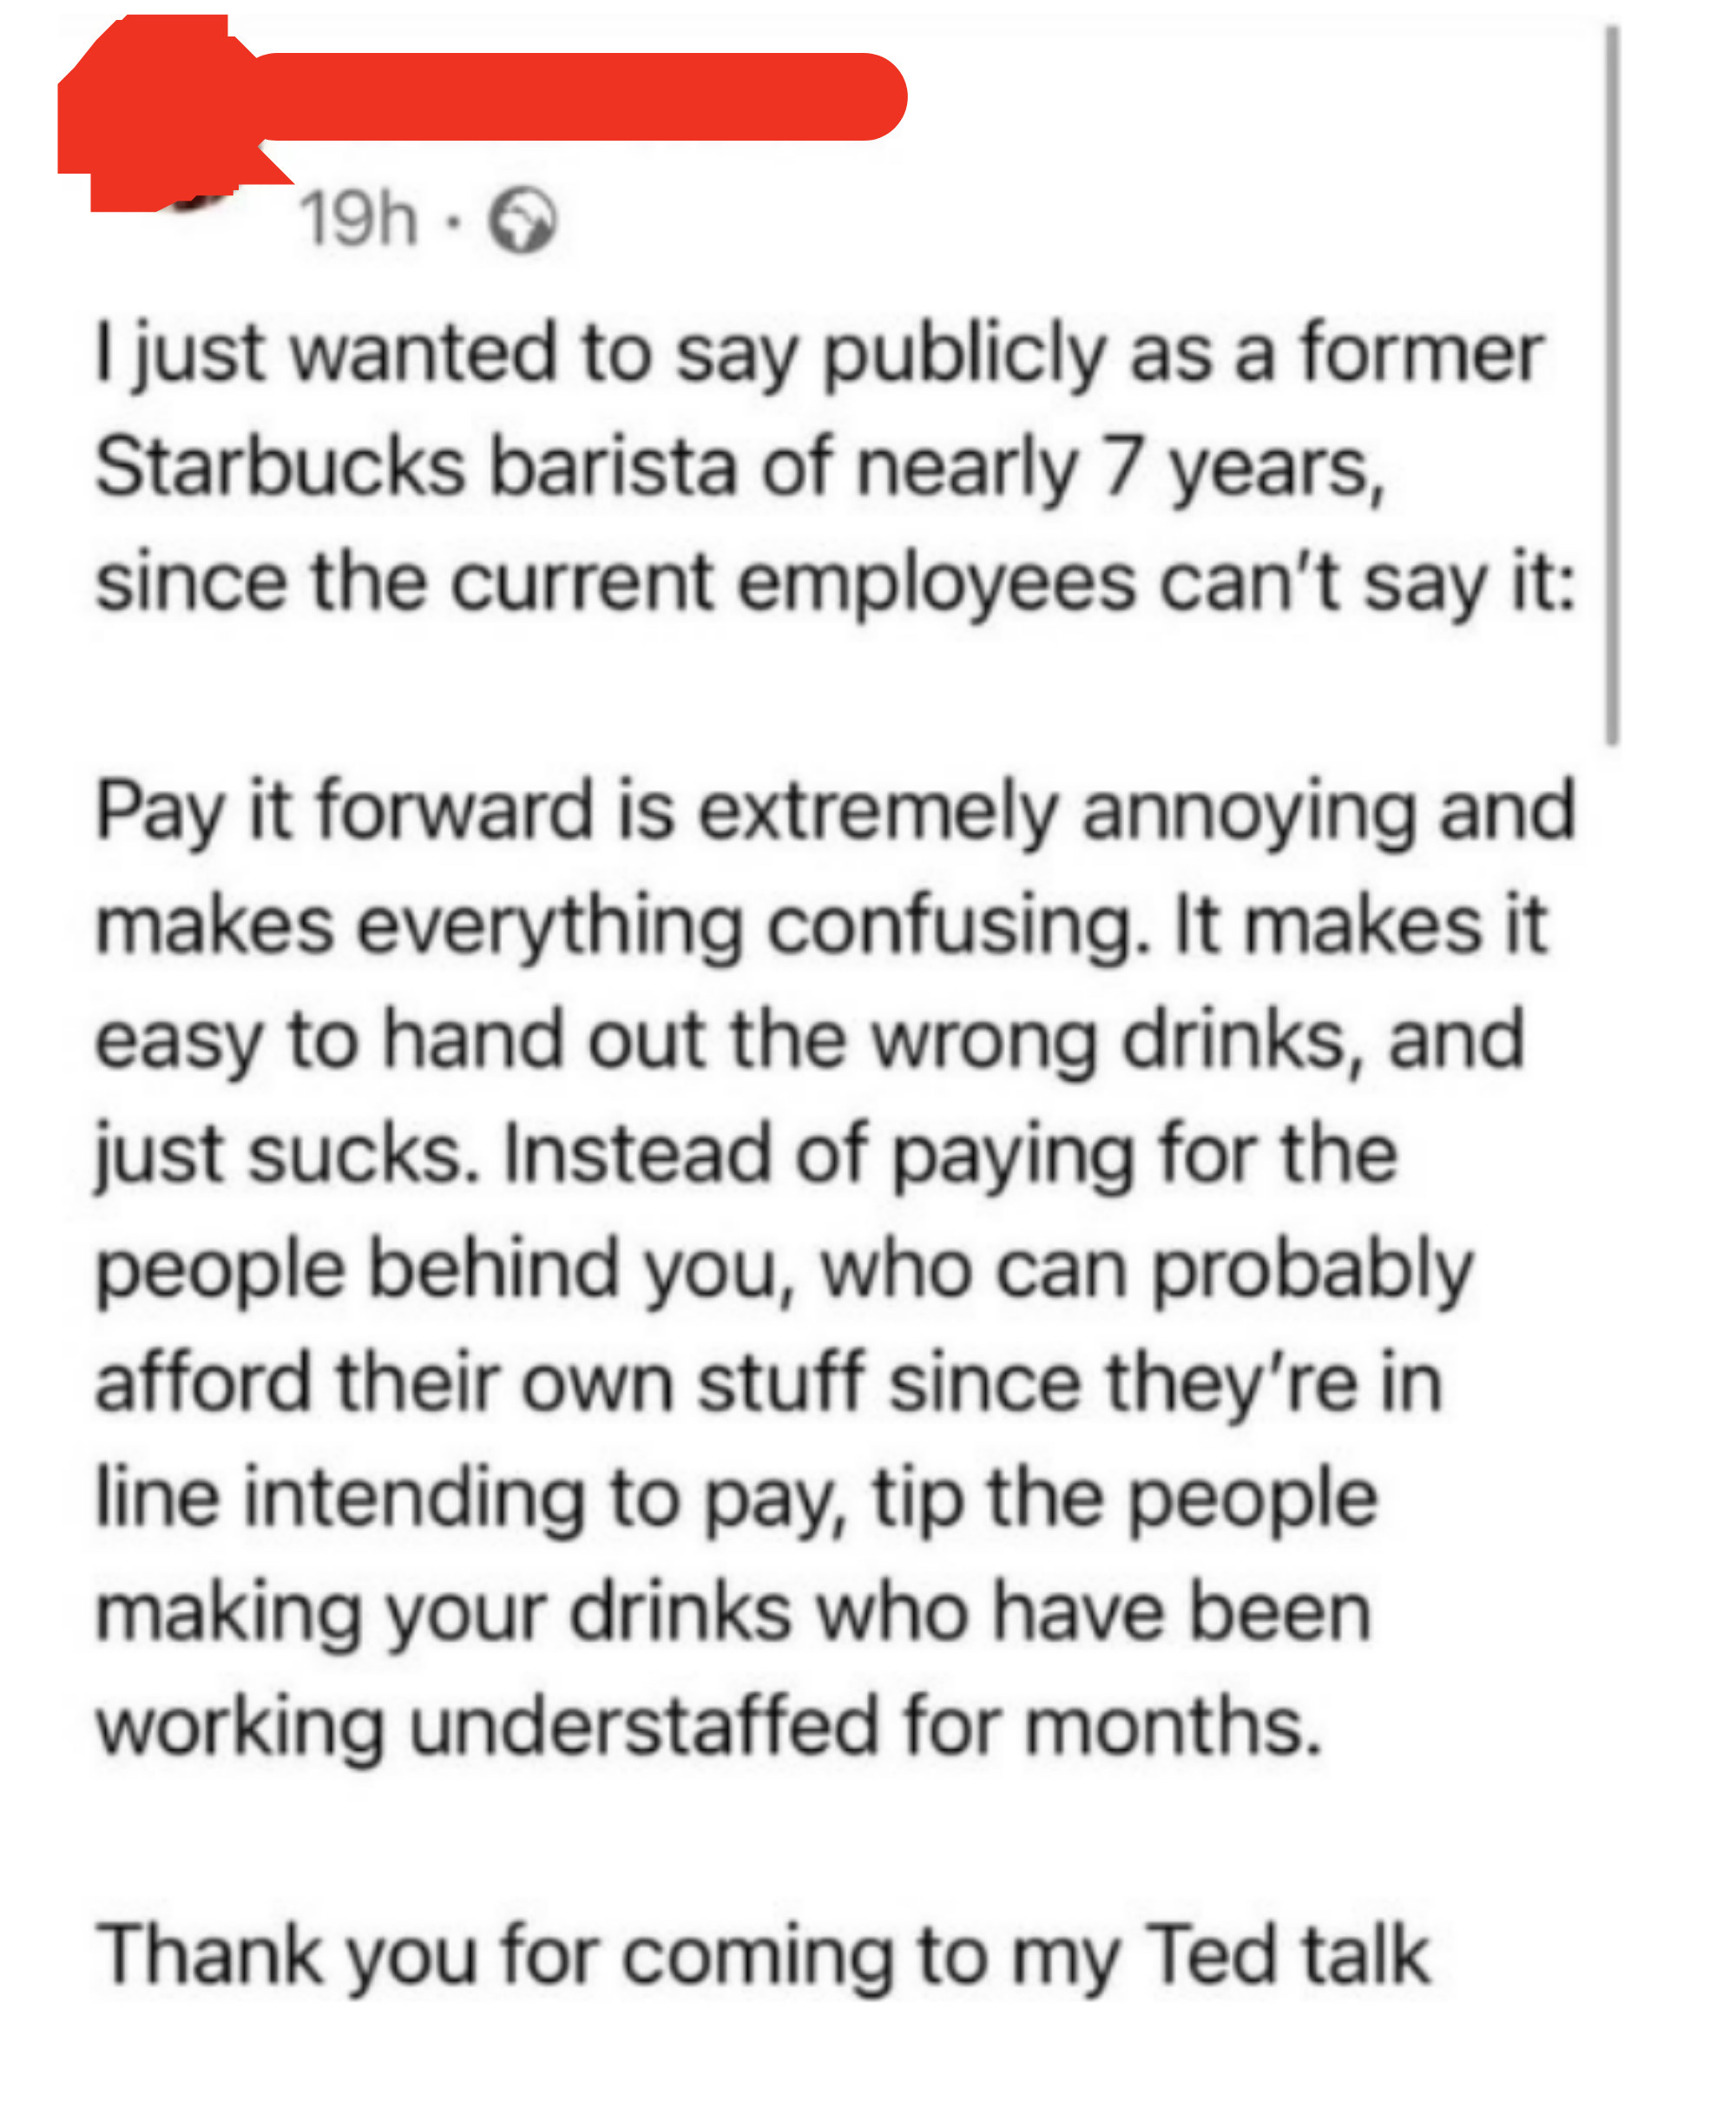 A person says paying for someone&#x27;s drink behind you just complicates things for the barista, so instead just tip your barista